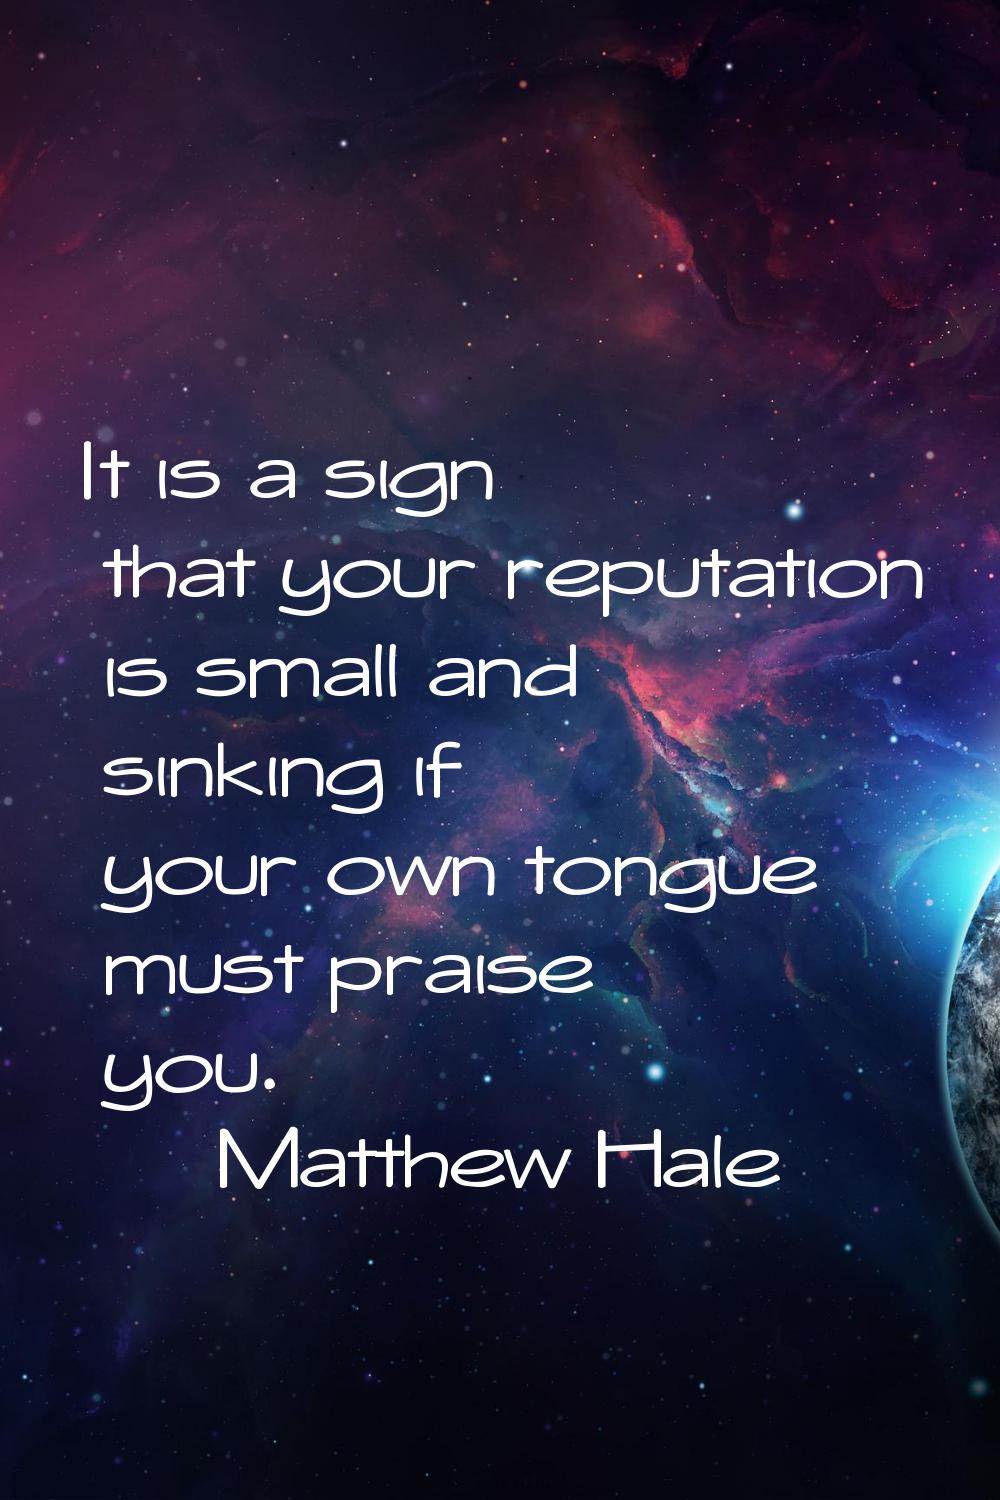 It is a sign that your reputation is small and sinking if your own tongue must praise you.